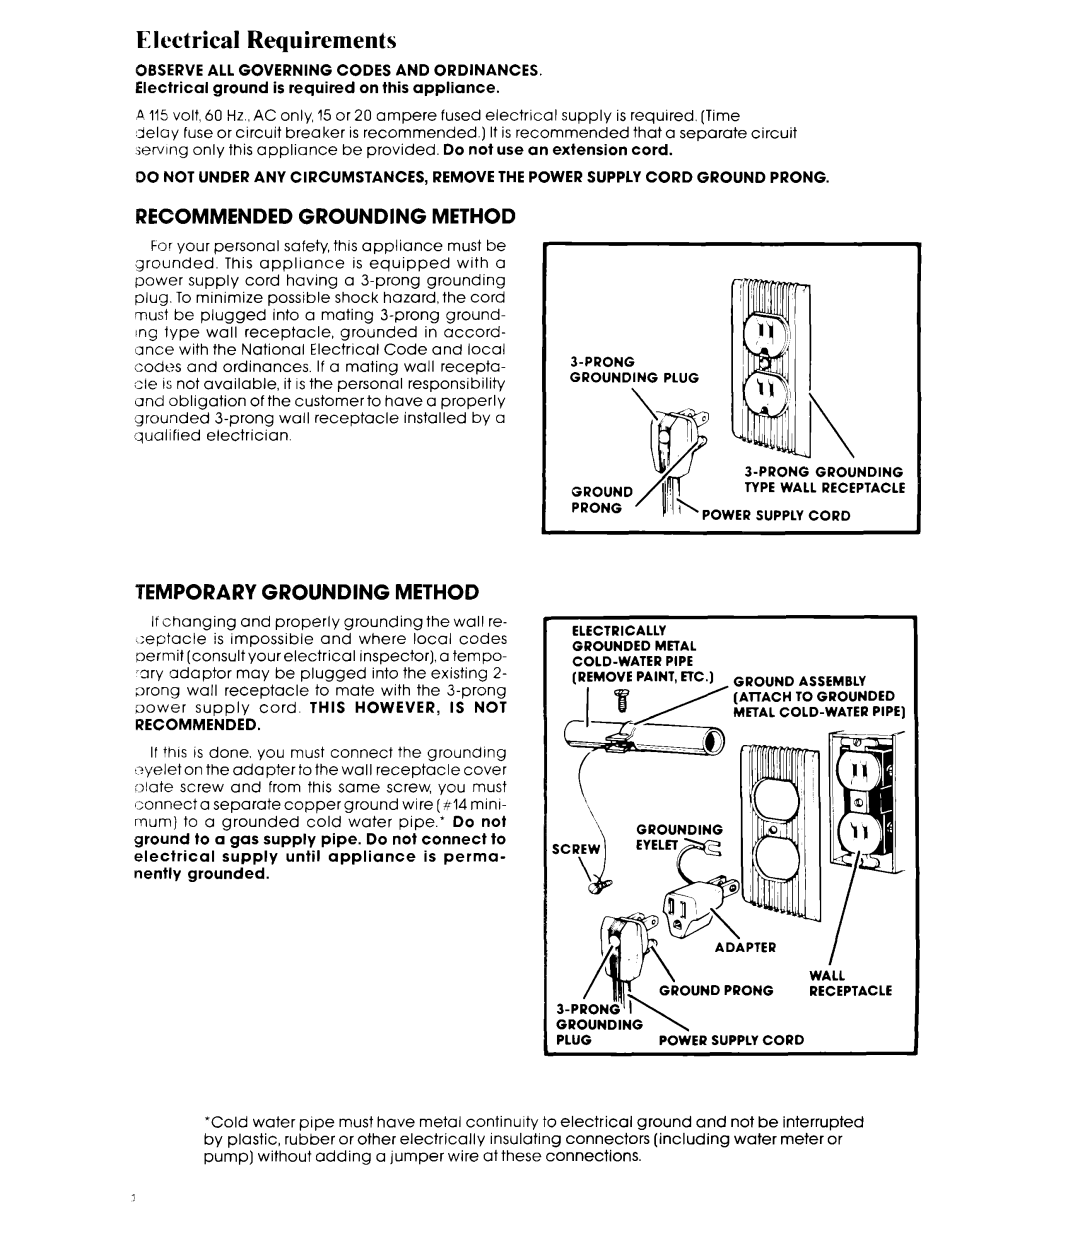 Whirlpool AD0402XS0 manual Electrical Requirements, Recommended Grounding Method, Temporary Grounding Method 